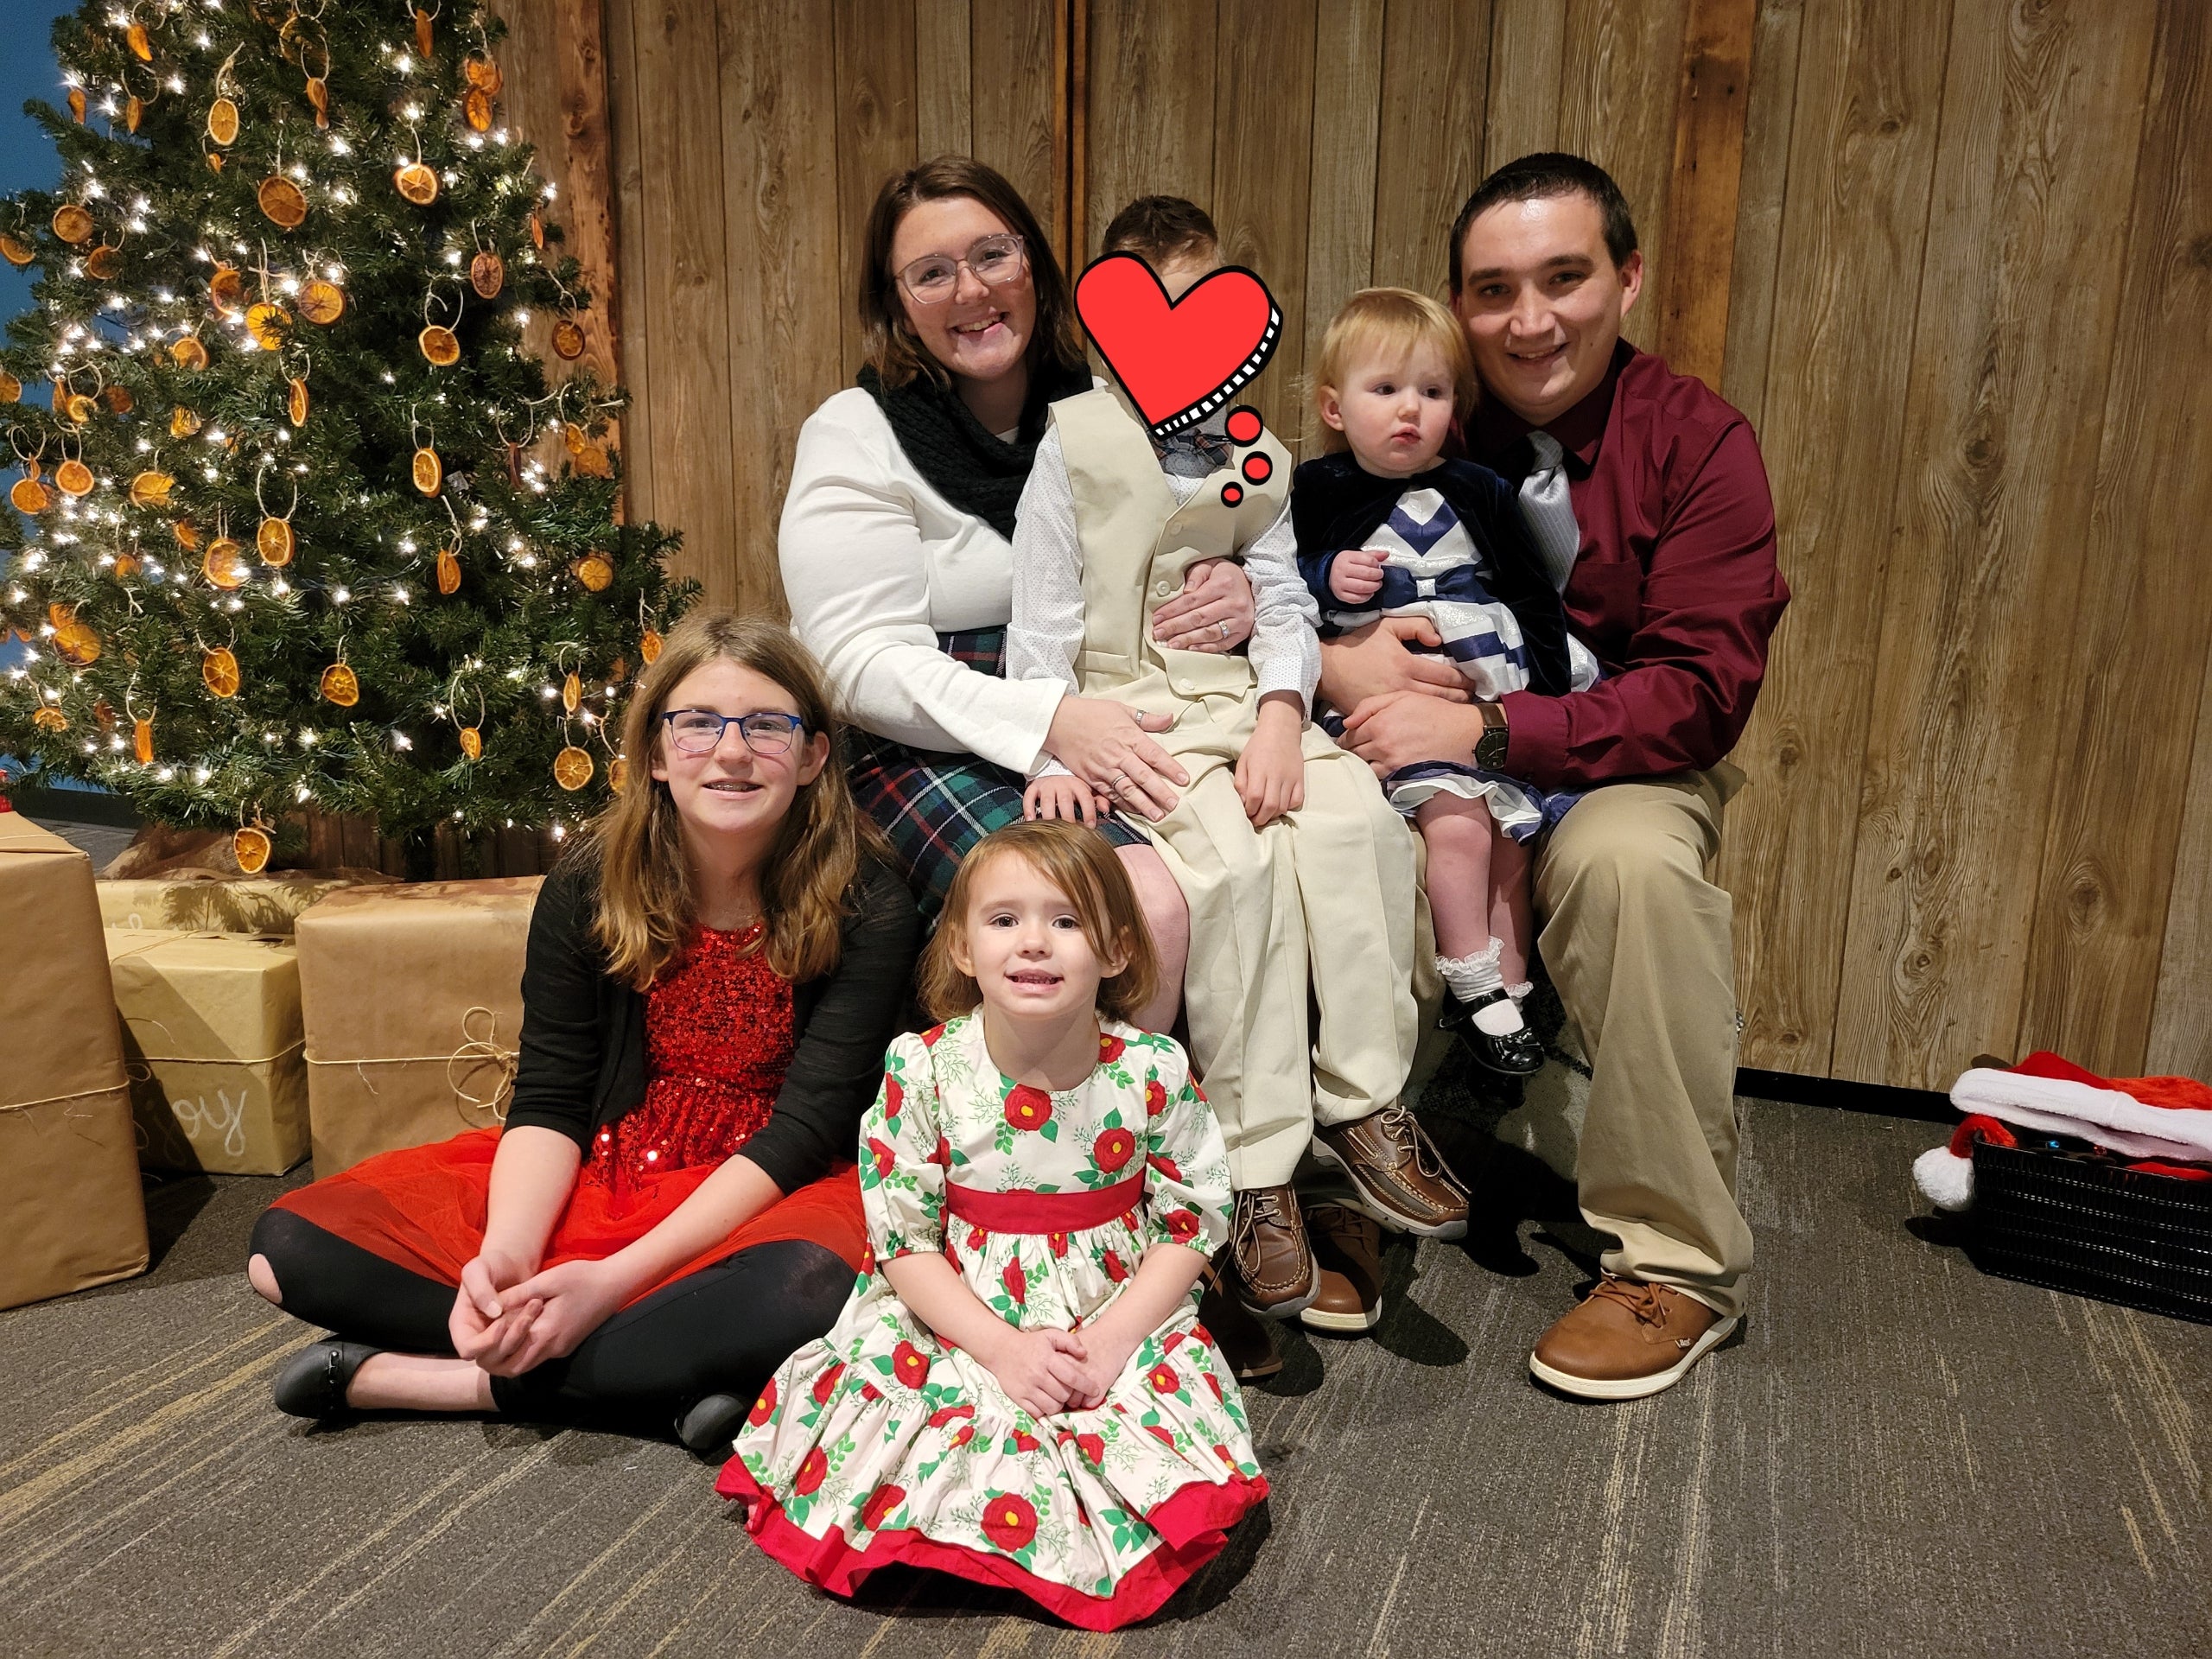 Anthony and Shannon Estes, of Plainfield, IL, pose with their children and the 7-year-old Ukrainian orphan they hosted over the winter; they are shielding his identity for the moment after filing his adoption application earlier this month